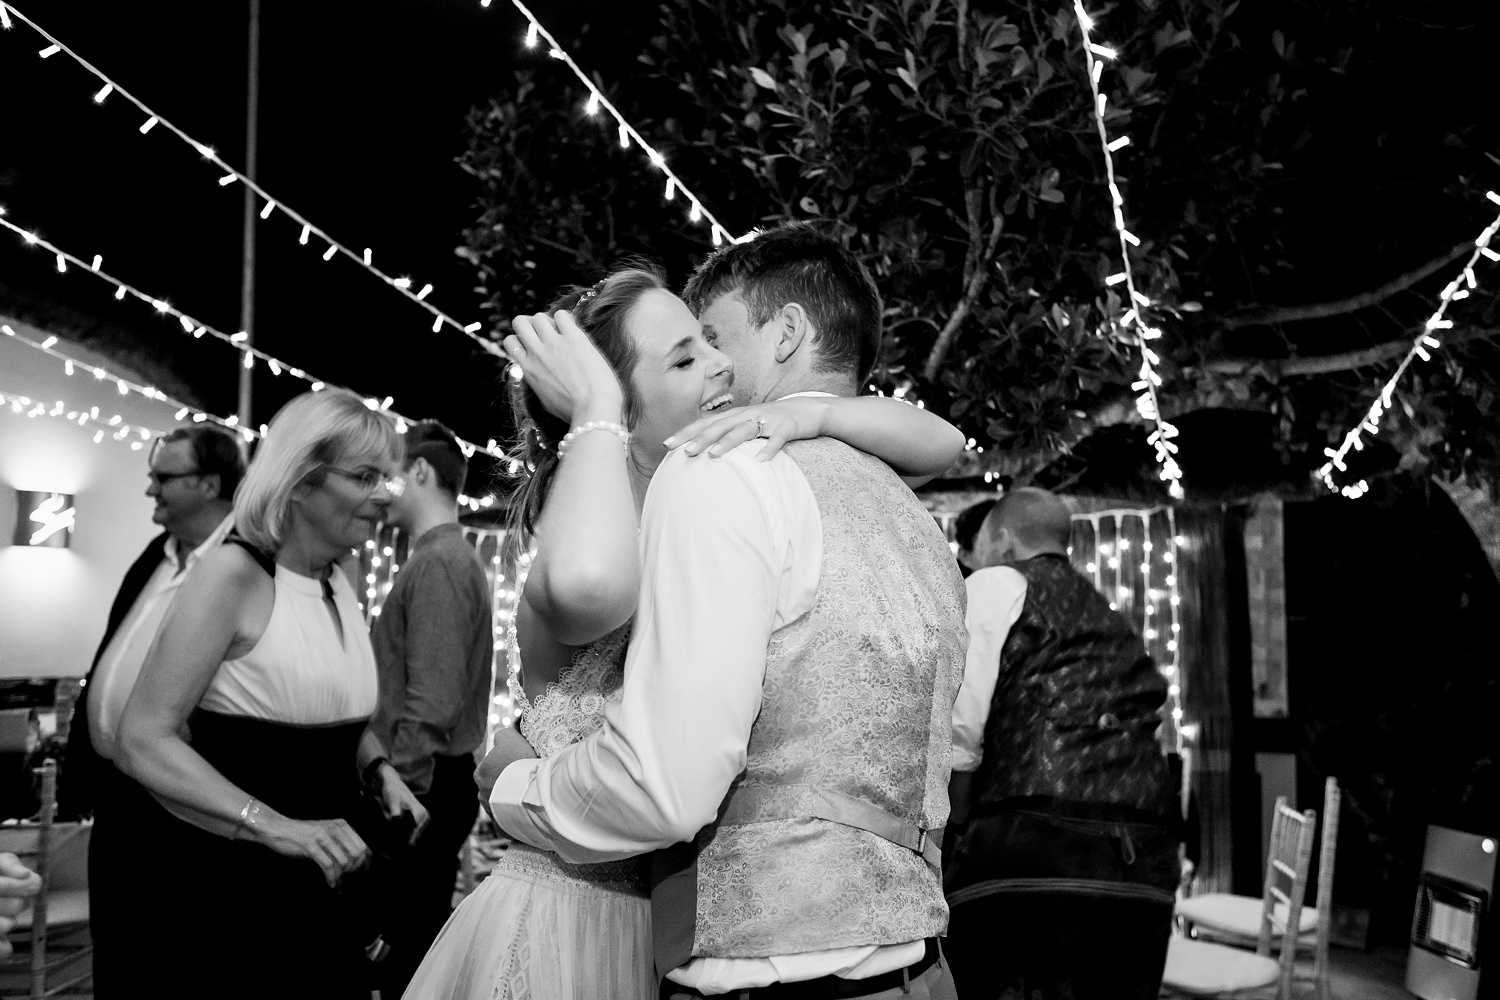 The bride hugs the groom and laughs on the dancefloor